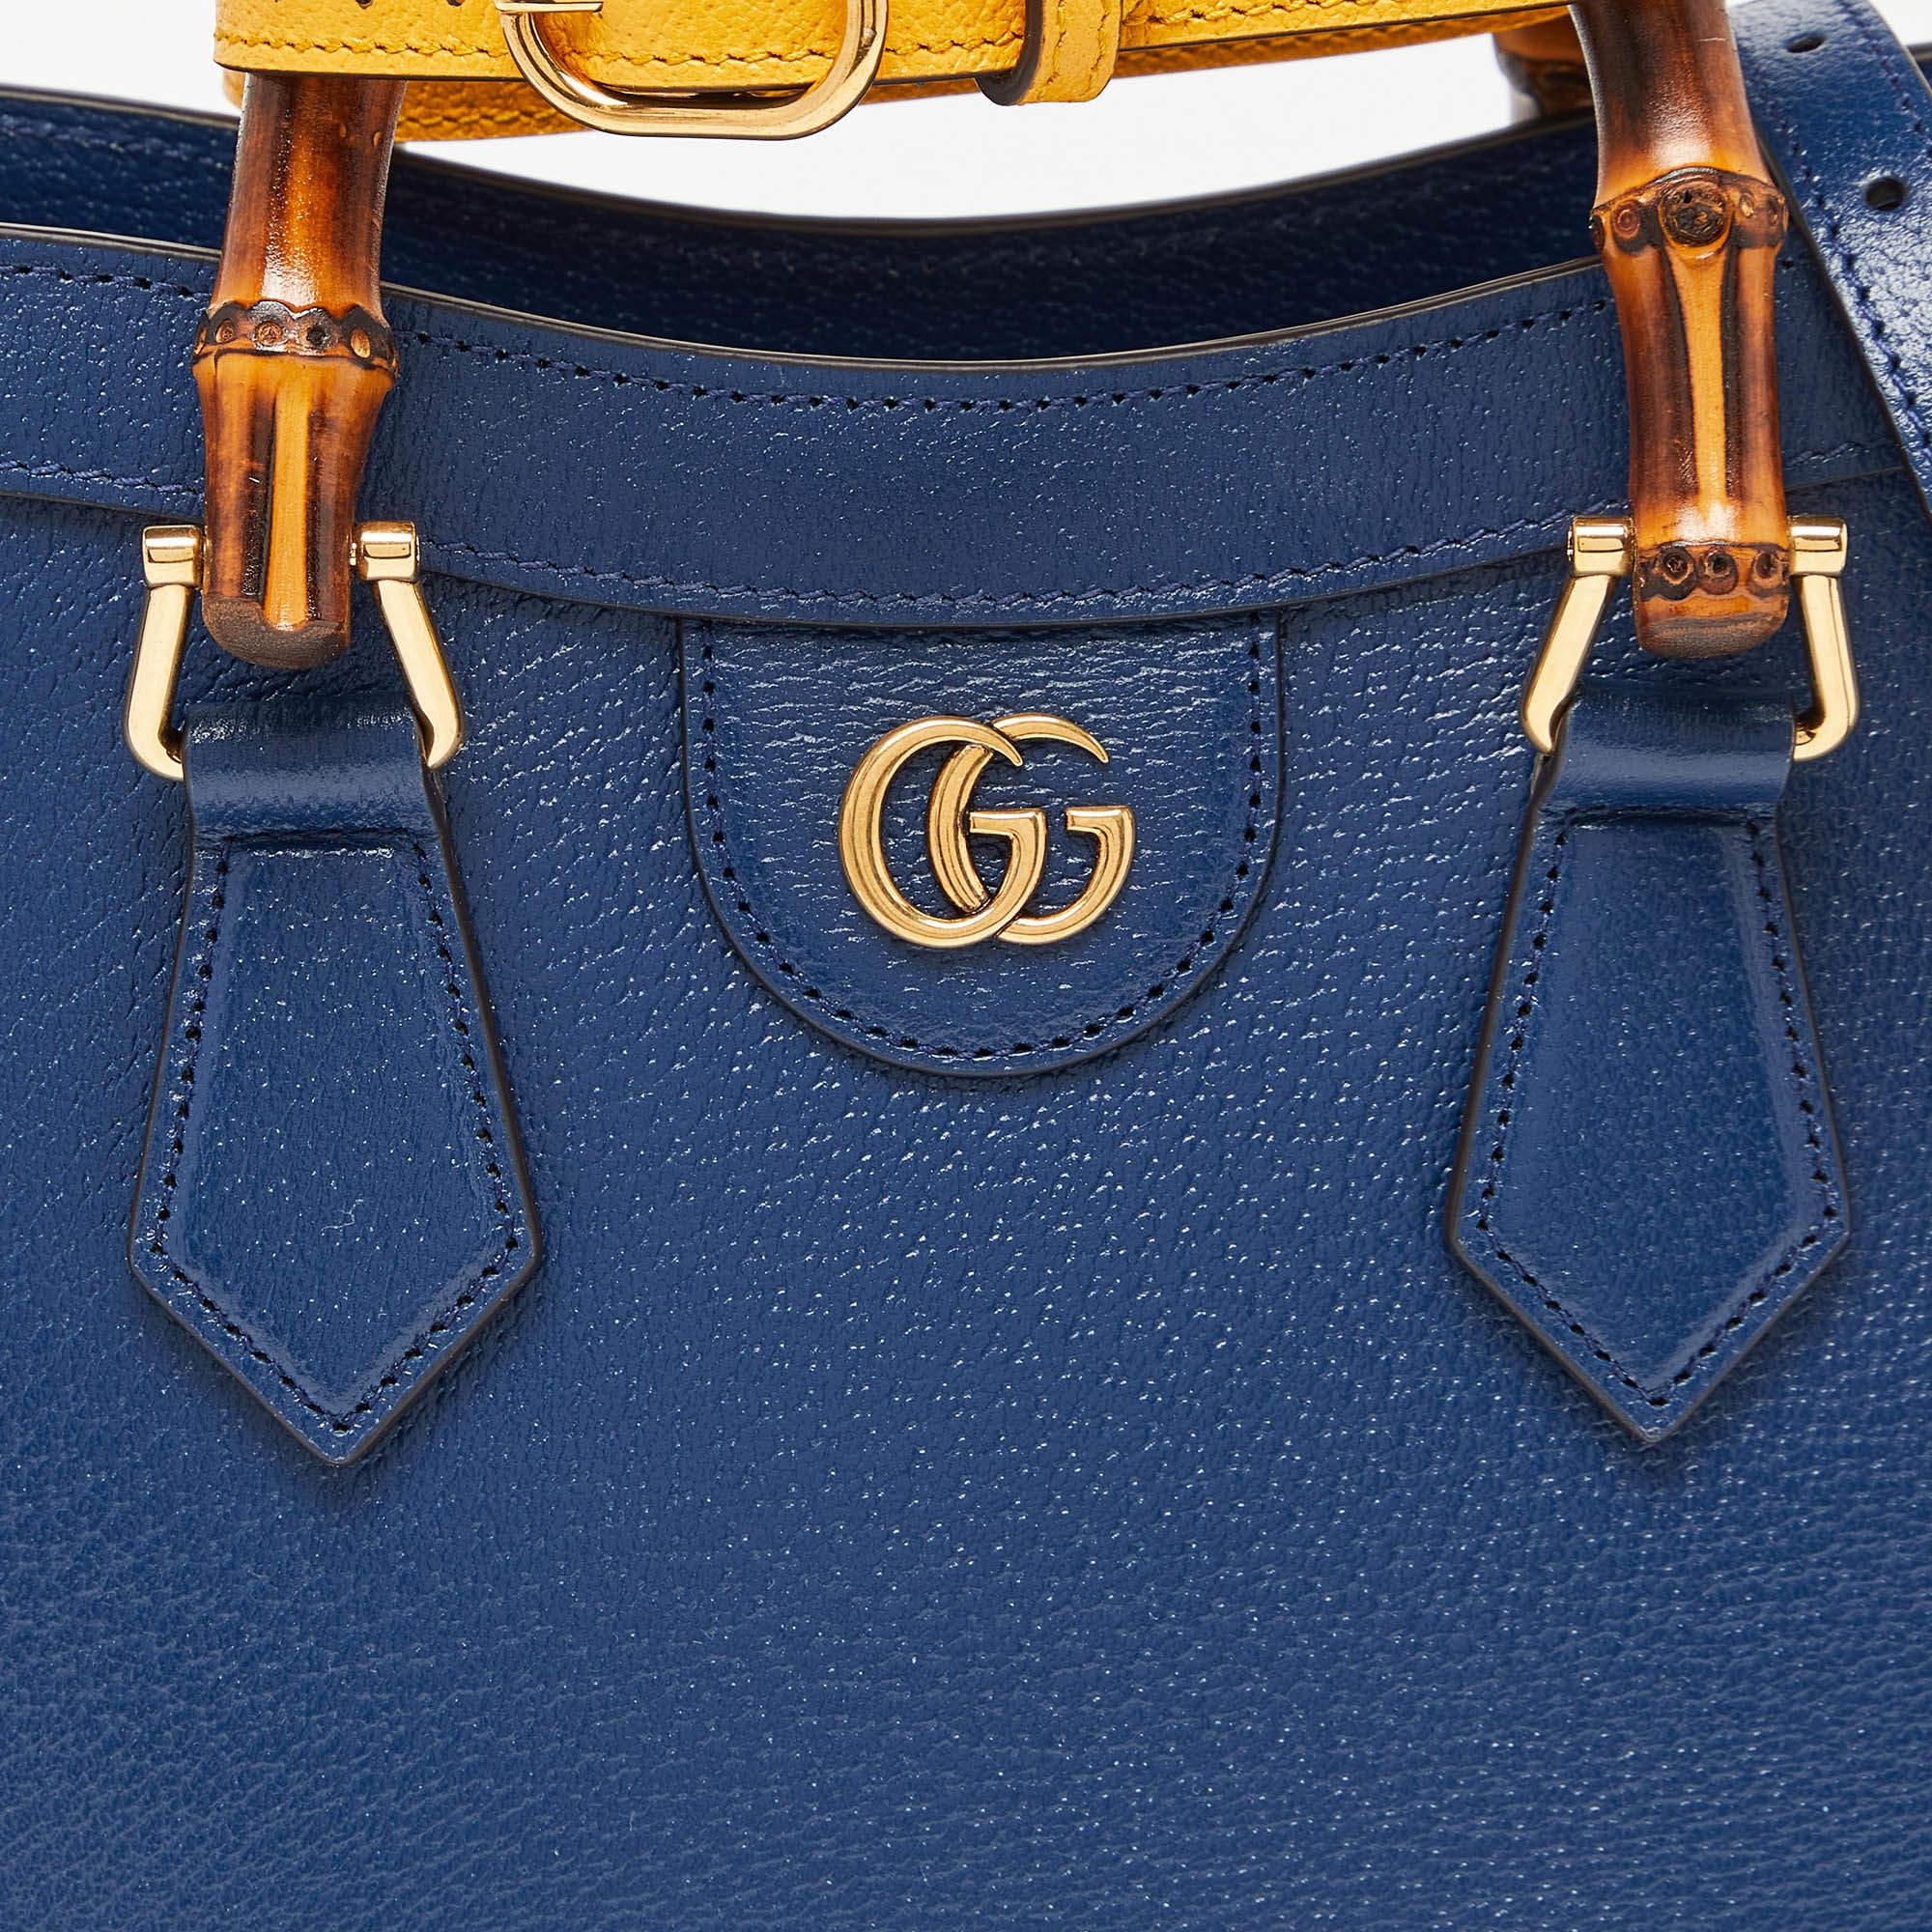 Gucci Navy Blue Leather Small Diana Tote 7